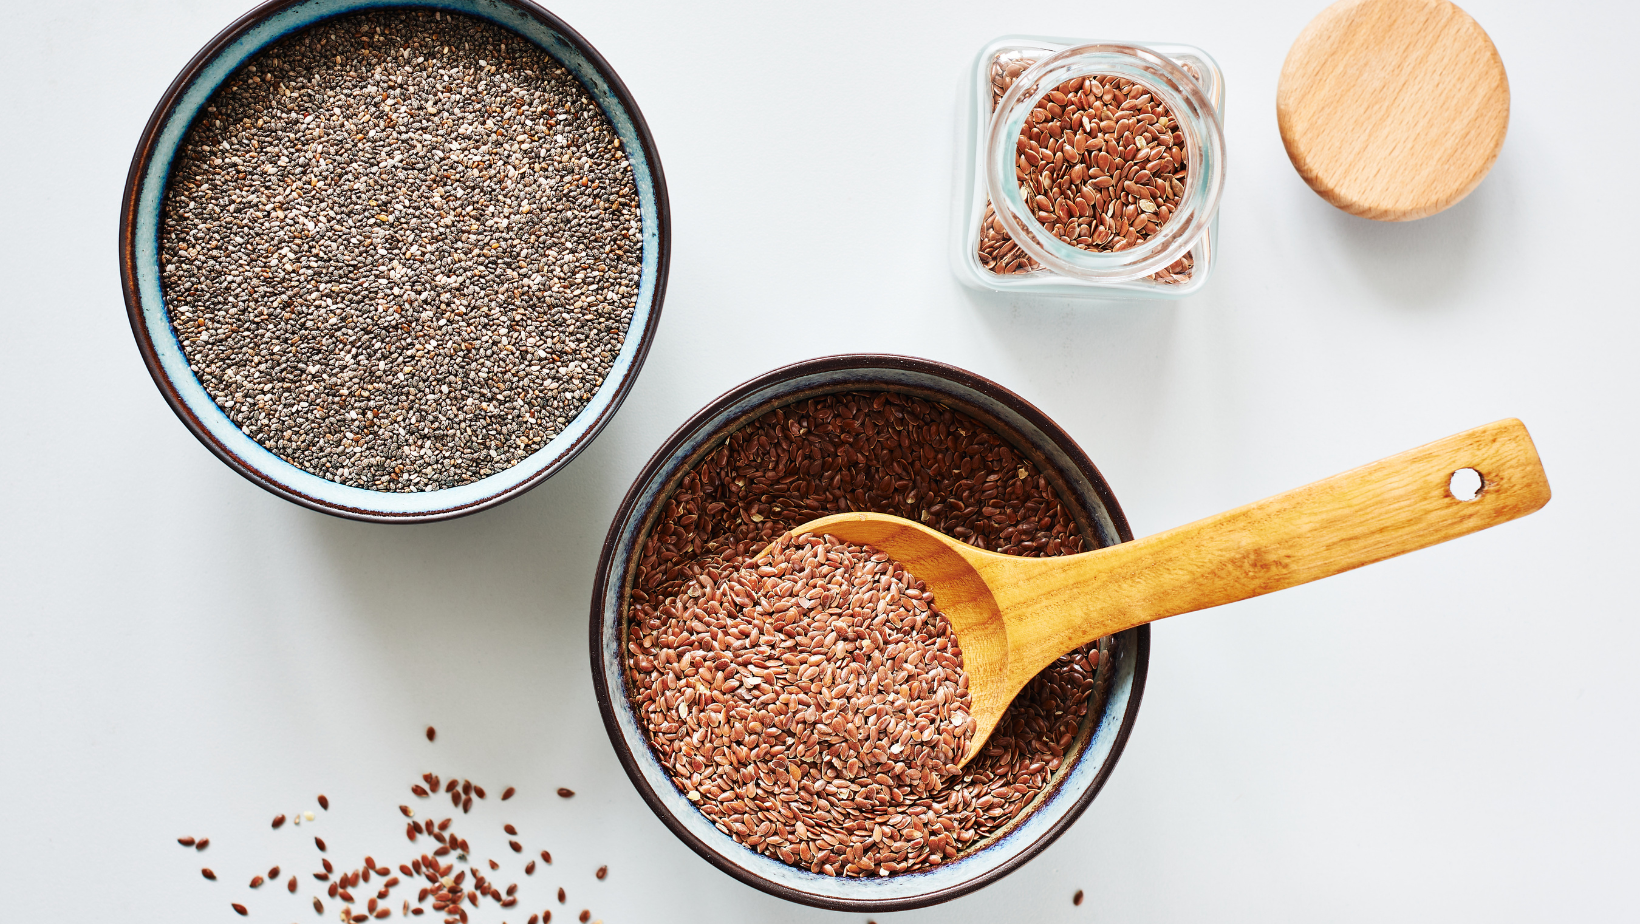 5 Benefits of Chia Seeds and Flax Seeds